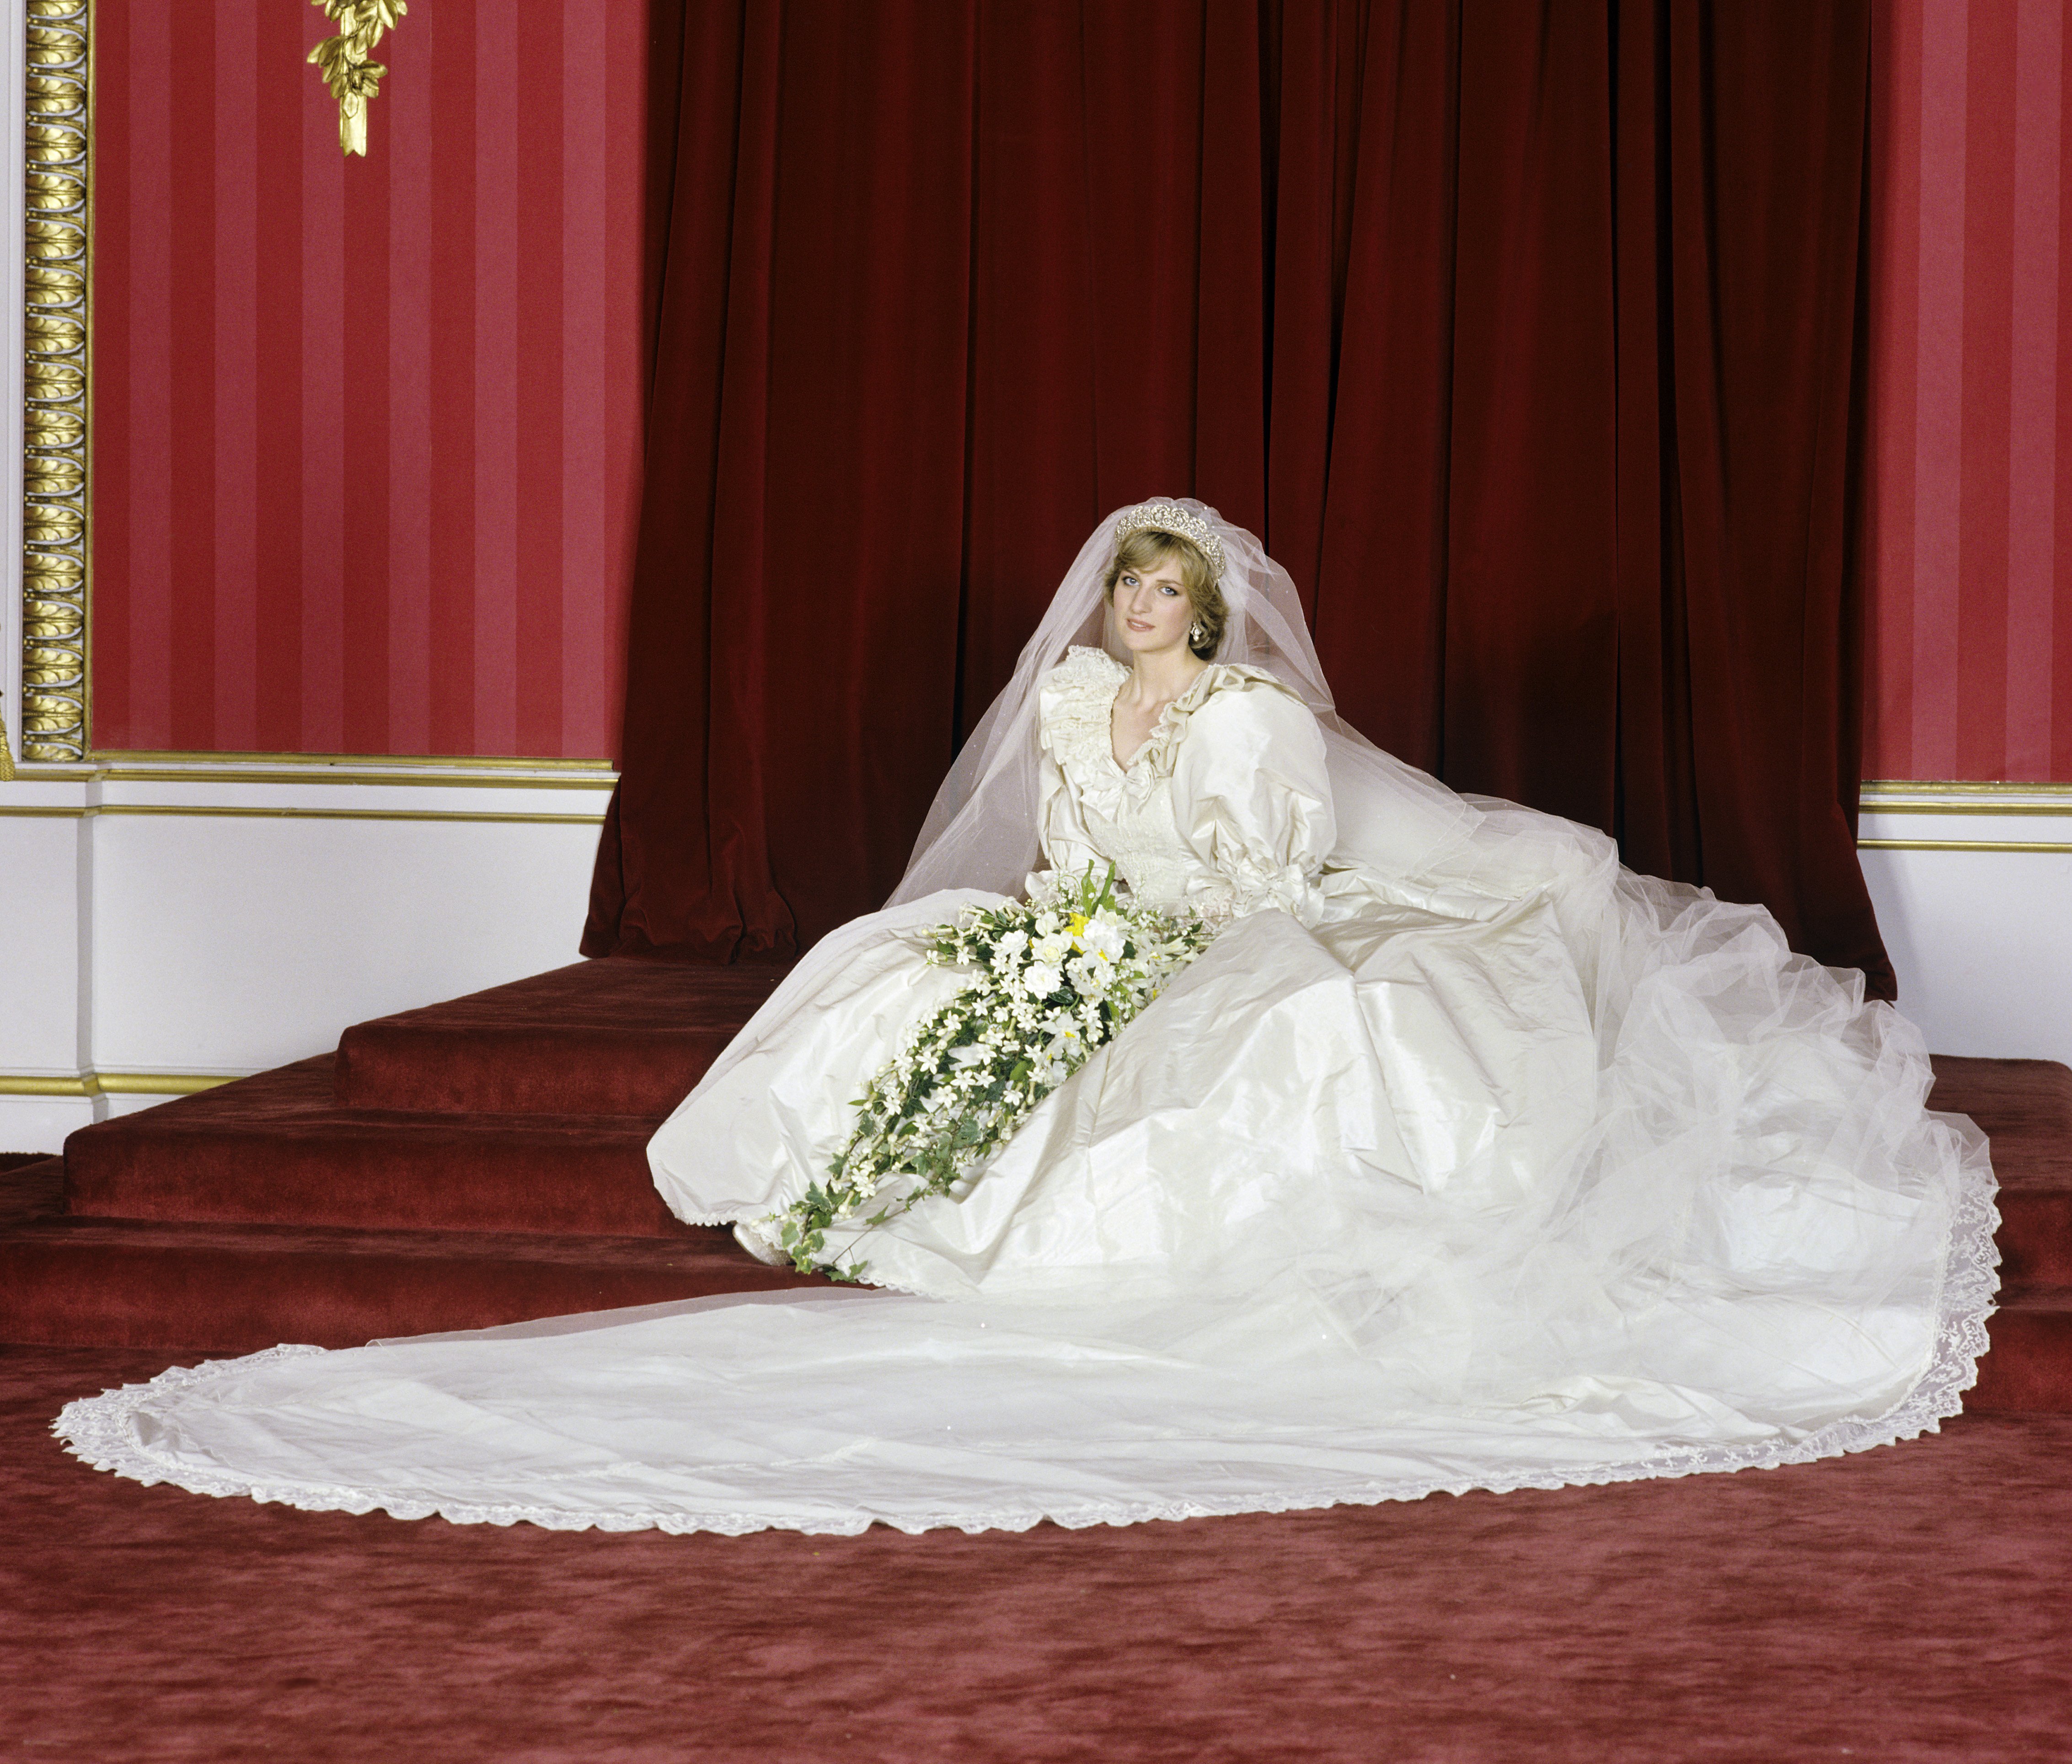 Princess Diana inside Buckingham Palace on her wedding day on July 29, 1981 | Source: Getty Images